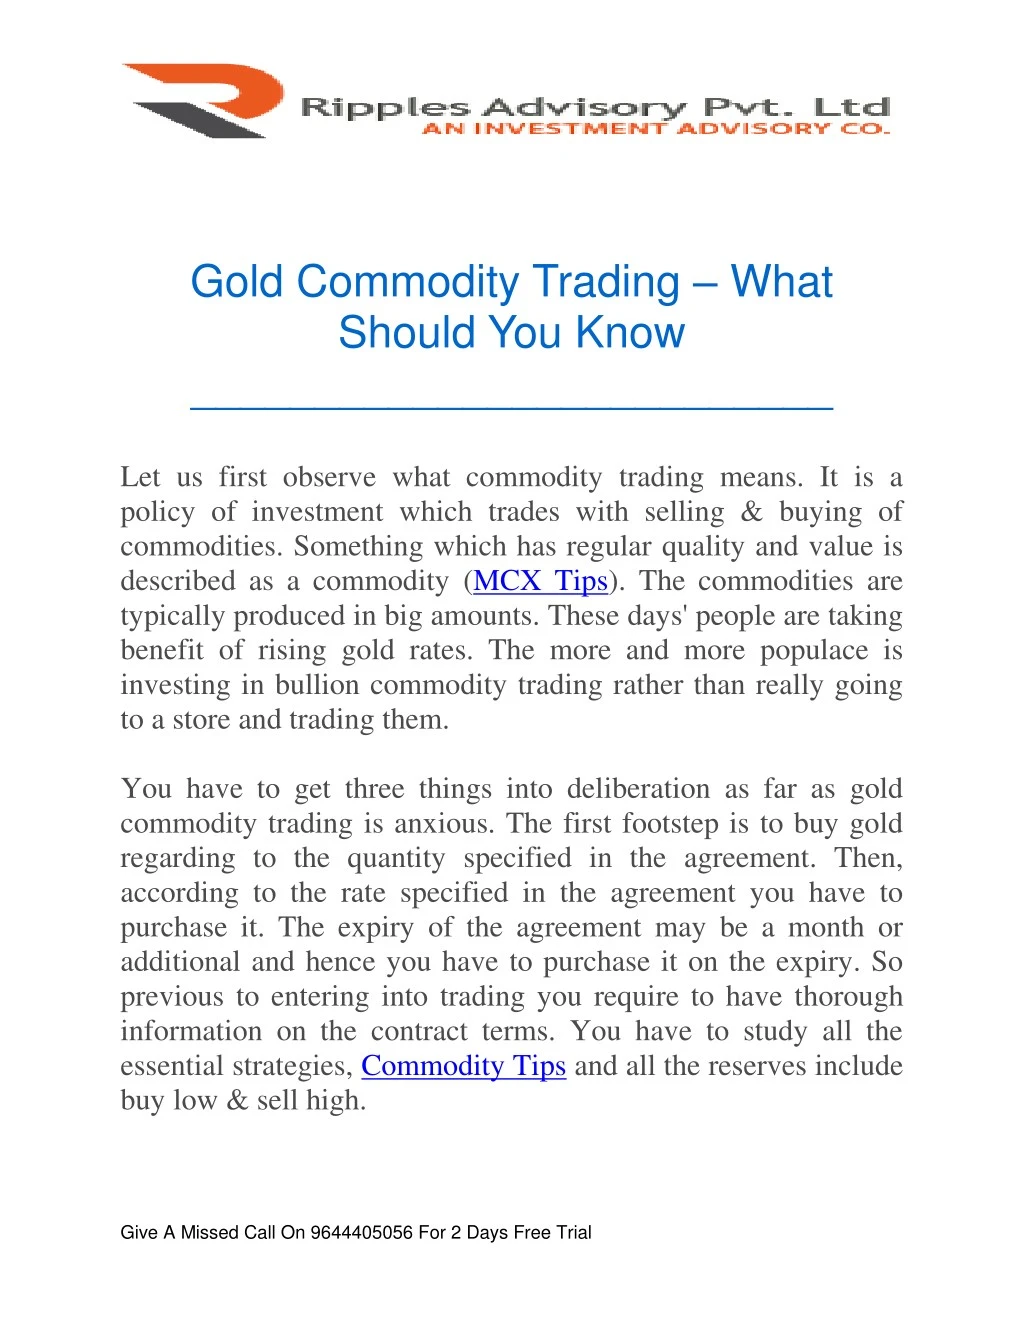 gold commodity trading what should you know